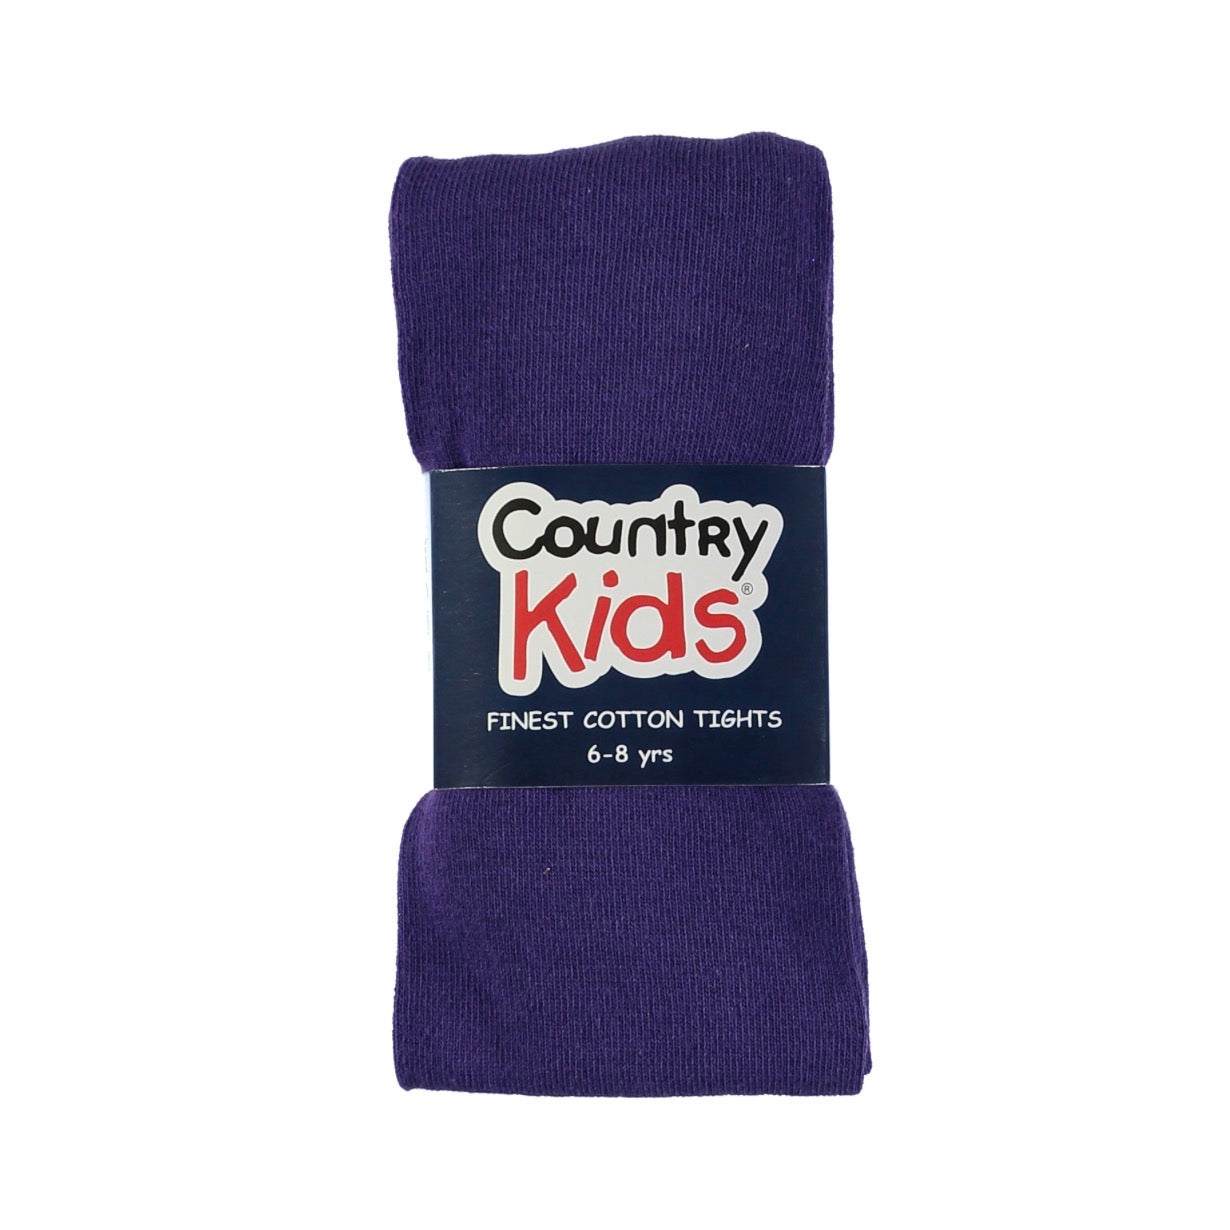 Country Kids Plain Tights Purple Clothing 3-5YRS / Purple,6-8YRS / Purple,9-11YRS / Purple,12-15YRS / Purple